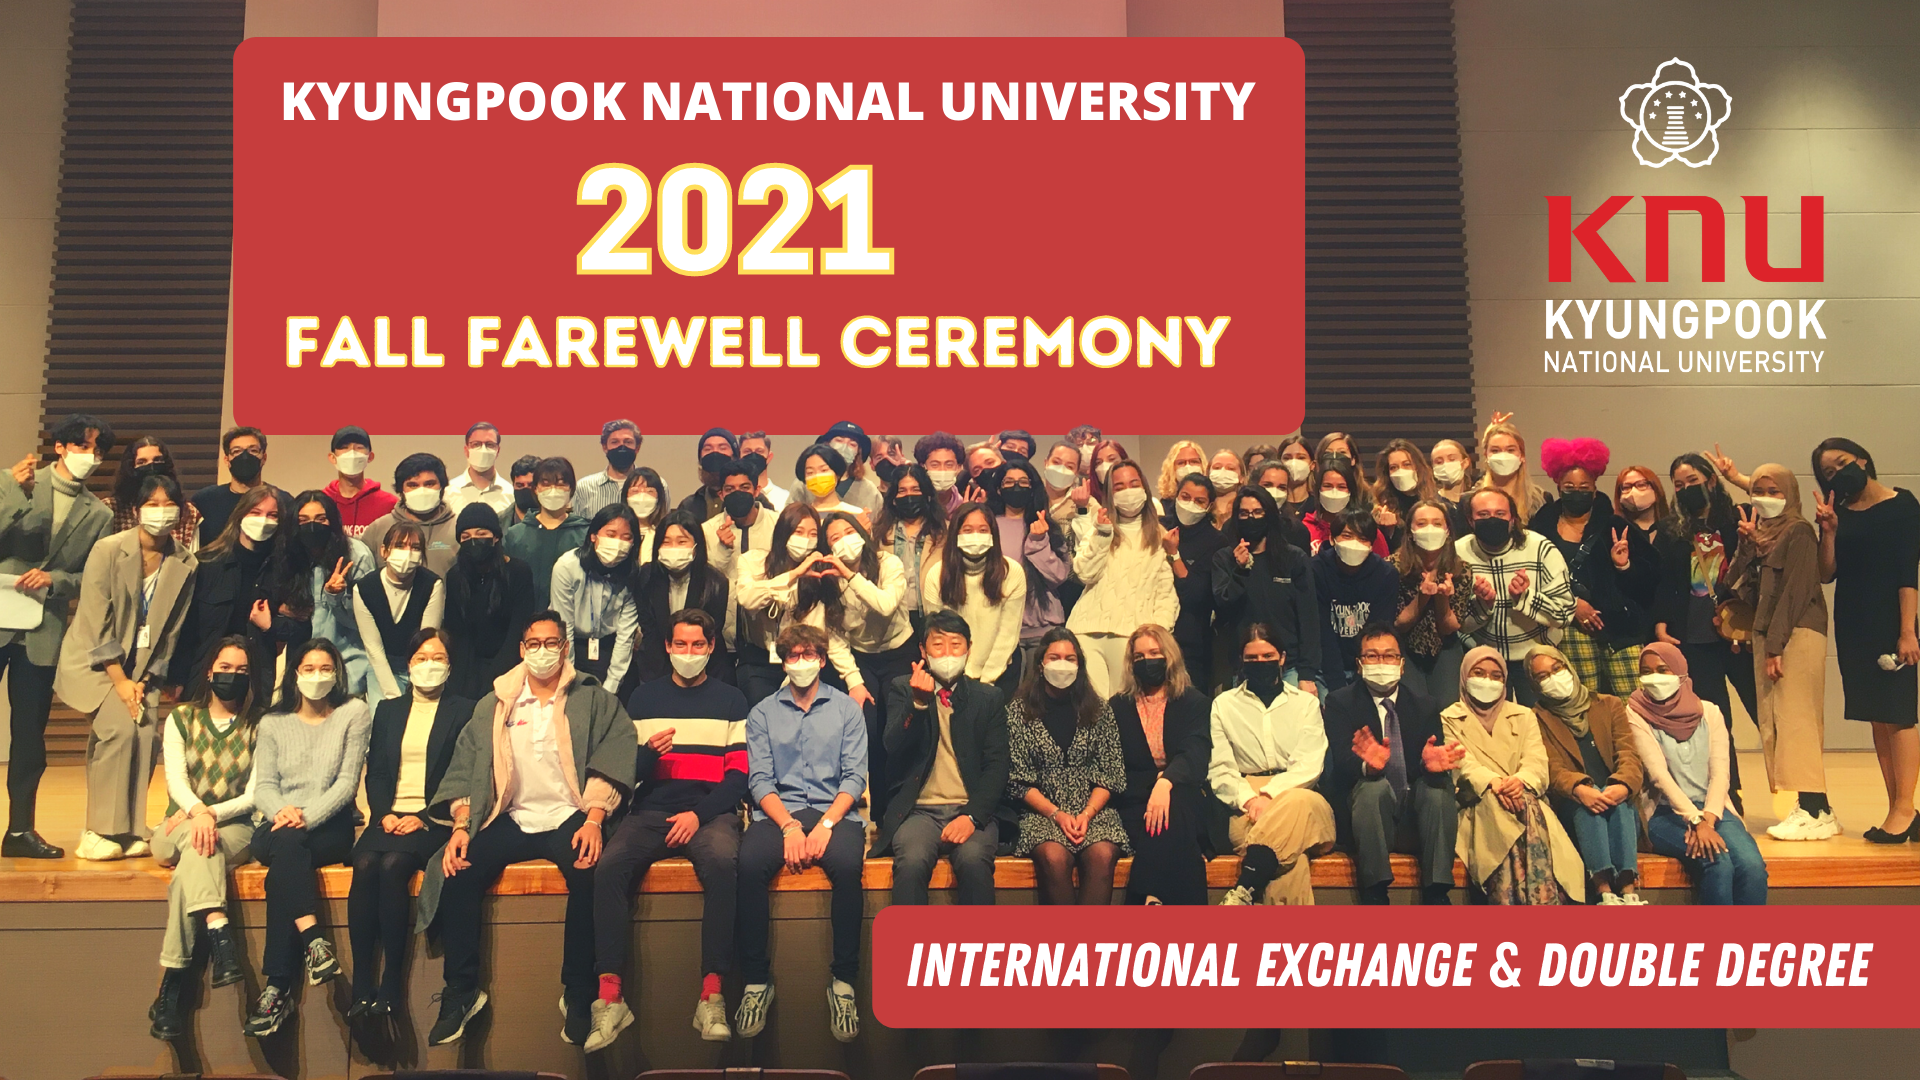 2021 fall farewell ceremony for exchange and double degree students 관련 이미지입니다